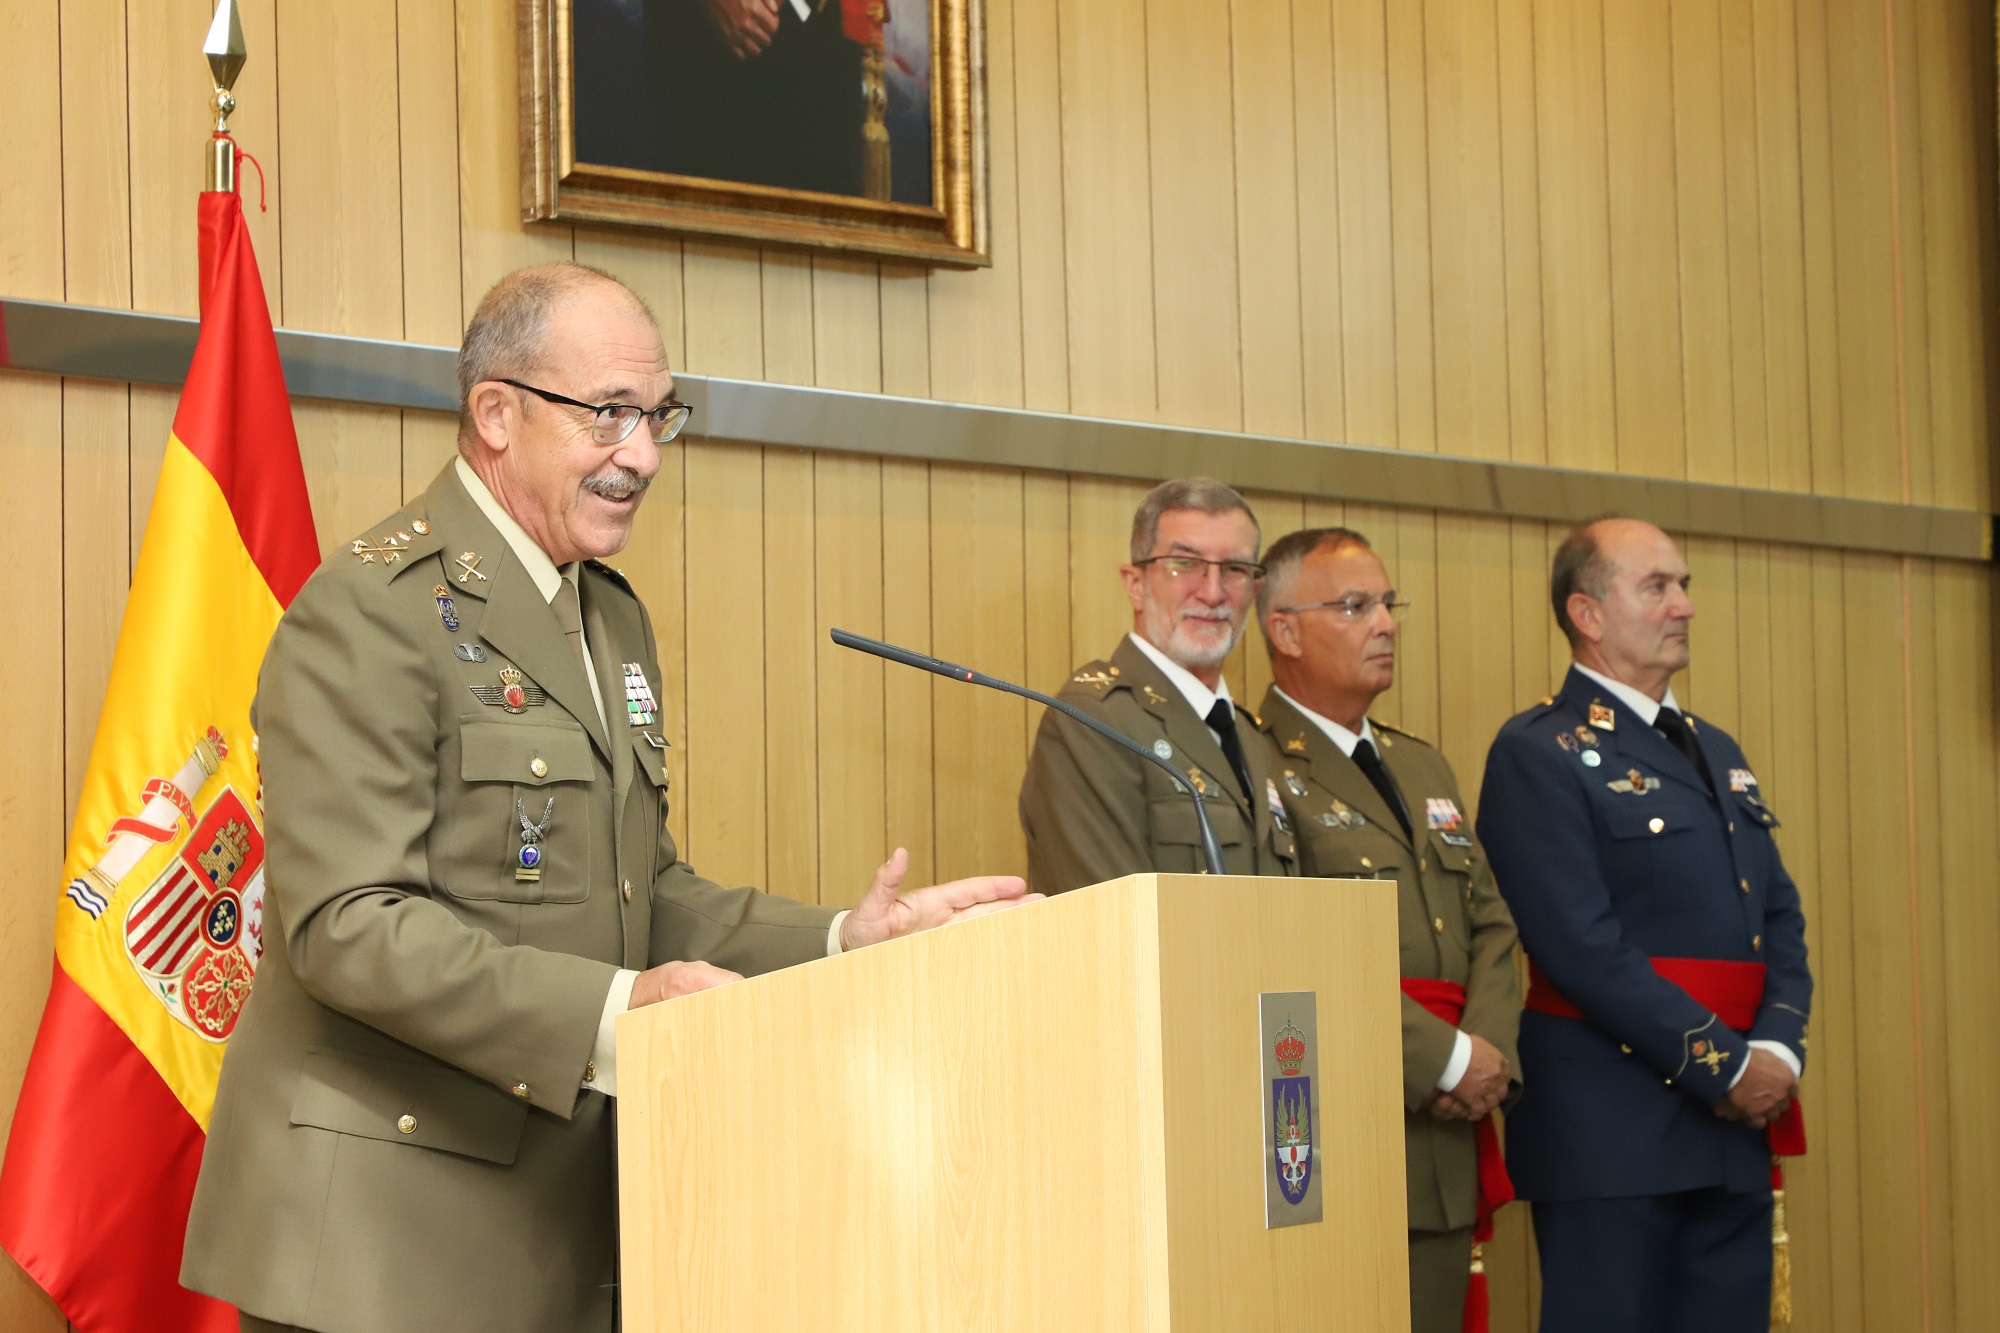 Major General Antonio Romero takes command as Director of the Spanish Armed Forces Intelligence Centre